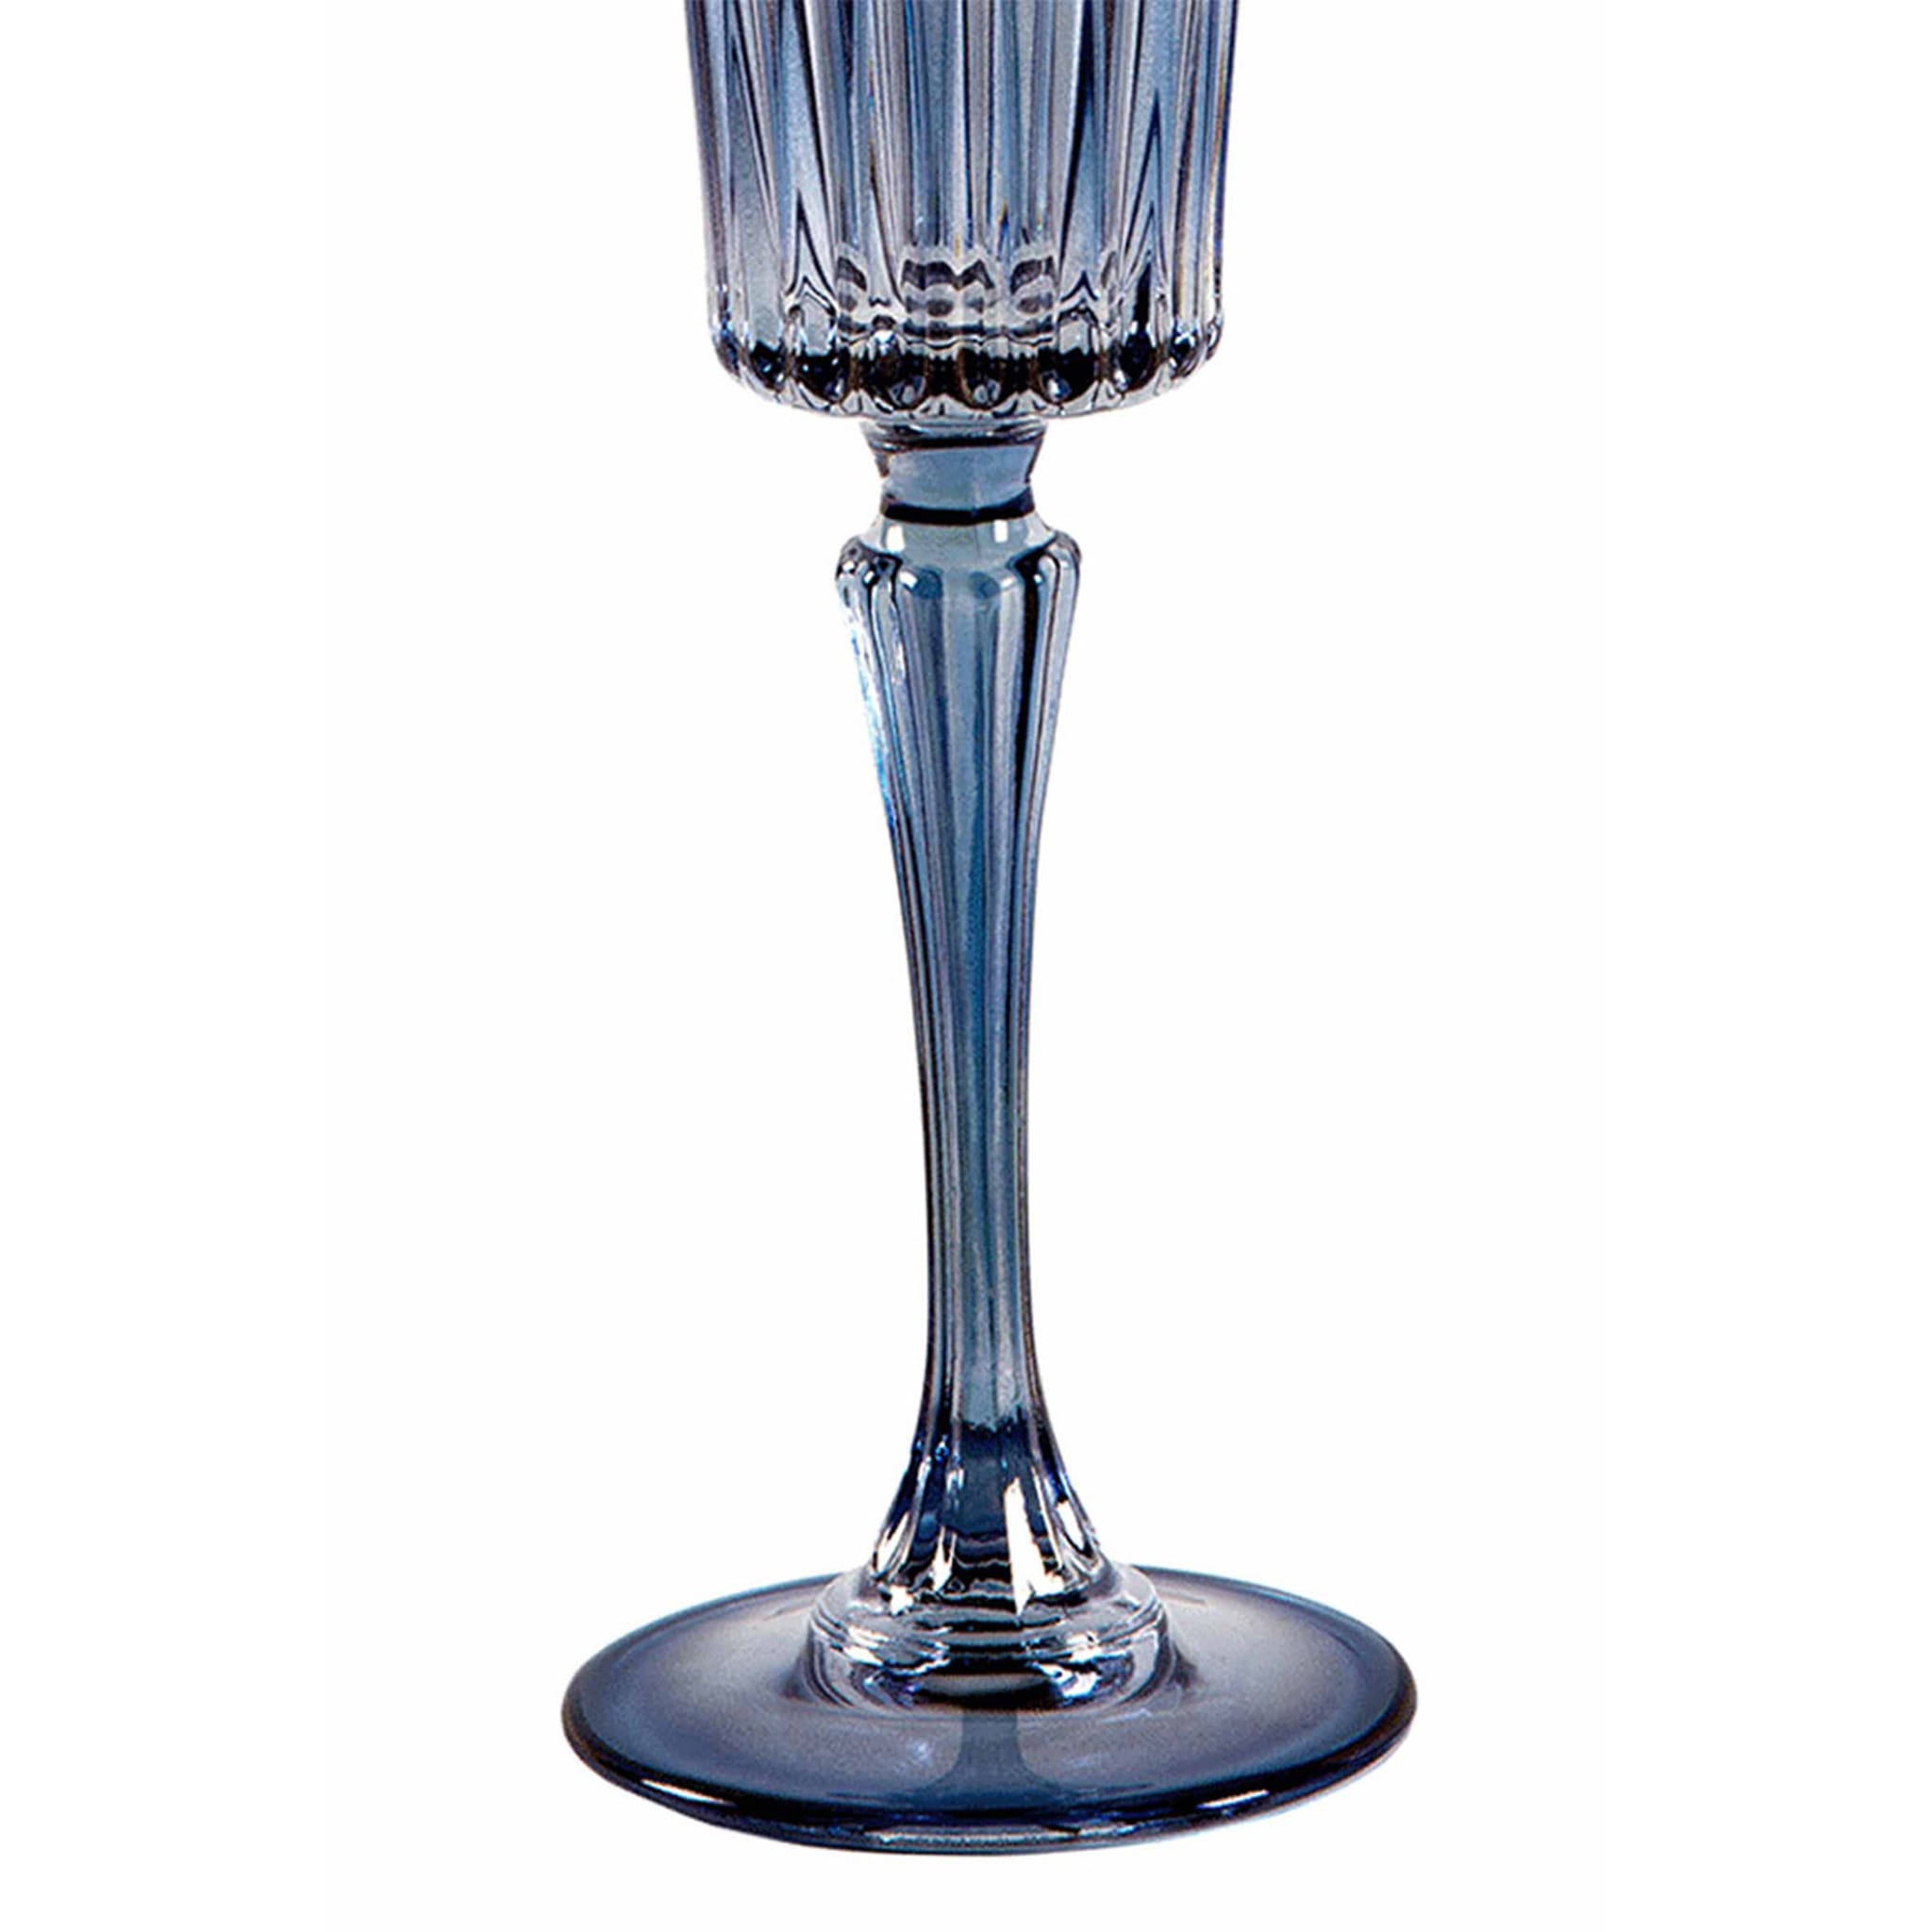 Domina Set of 2 Purple-To-Blue Water Flutes - Alternative view 1